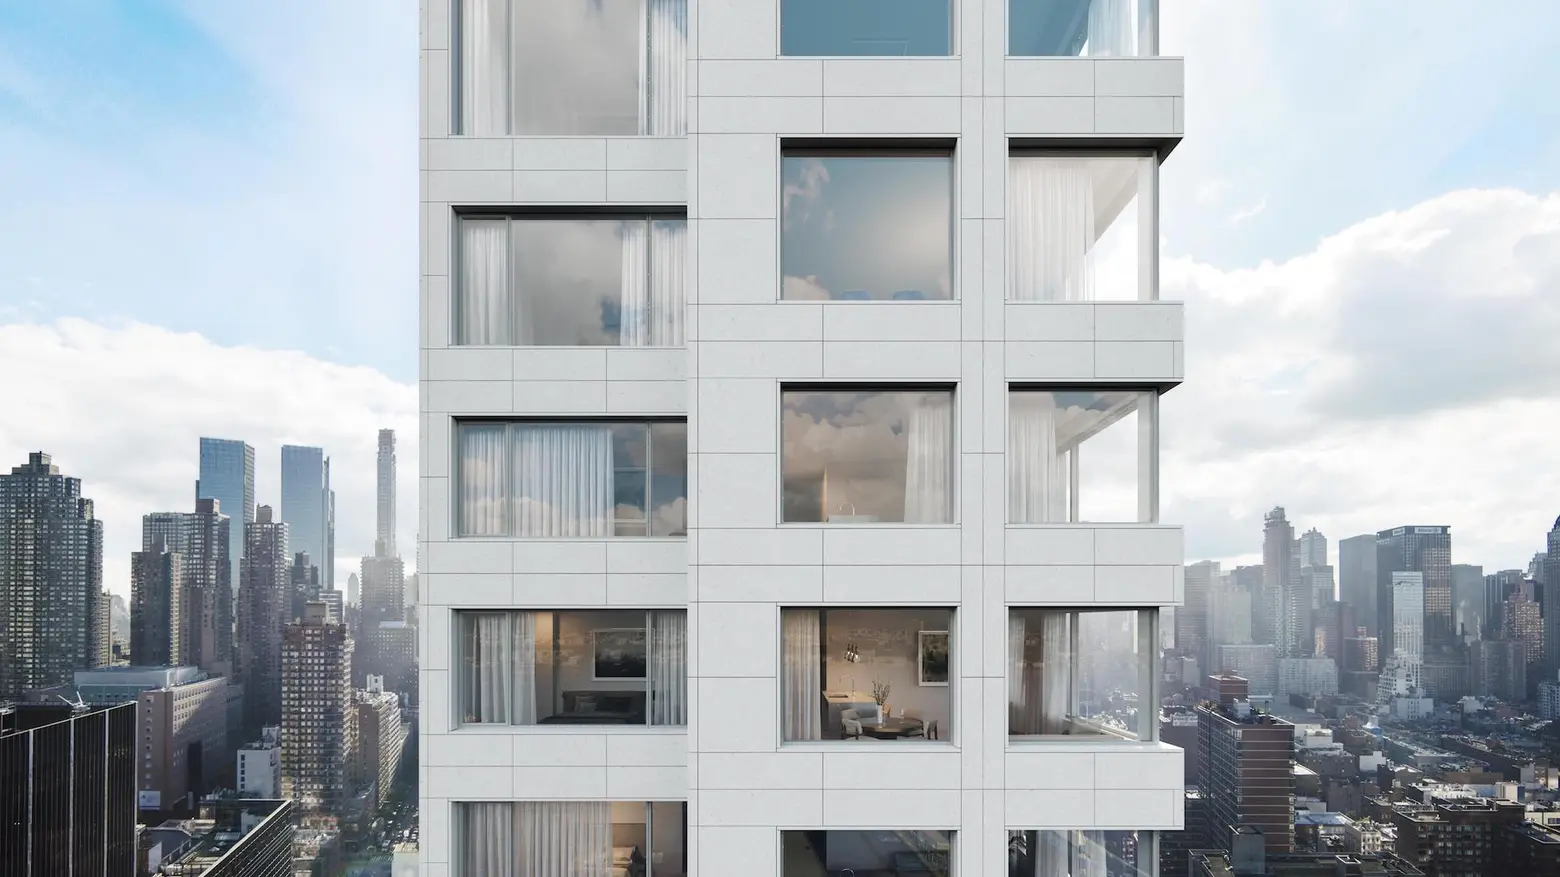 New renderings for Pritzker Prize winner Álvaro Siza’s first U.S. building in Hell’s Kitchen